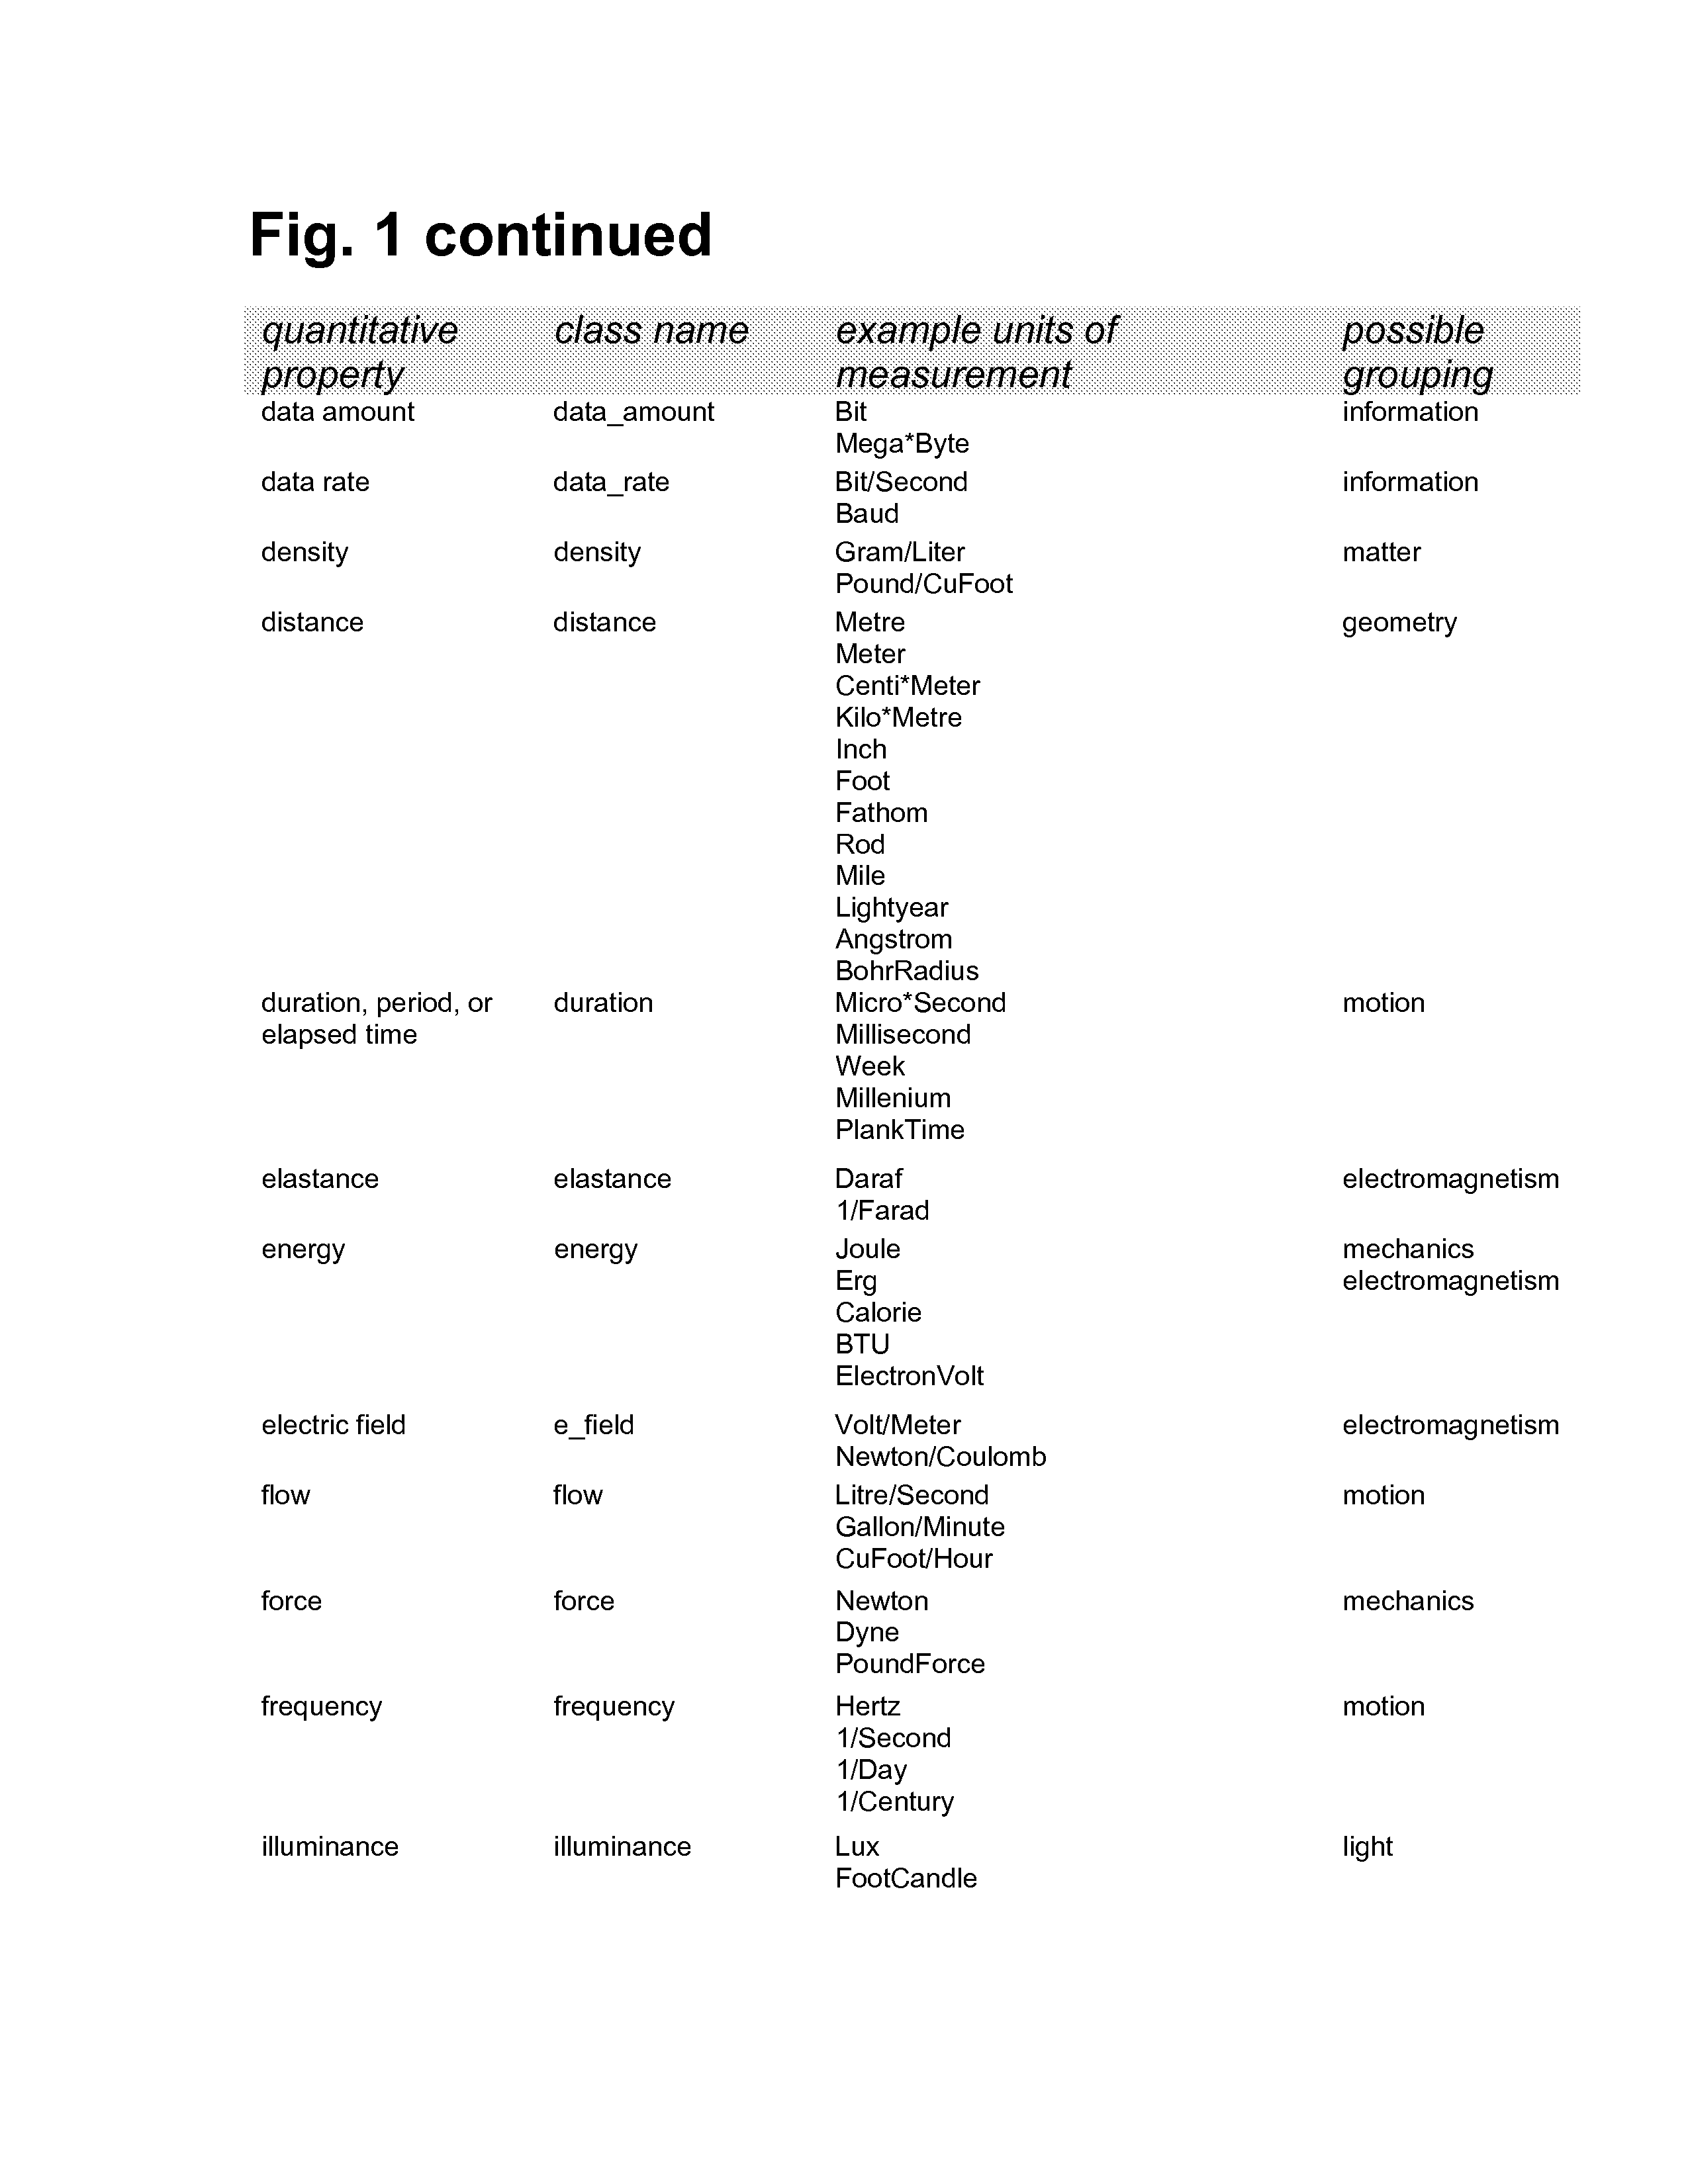 Method and System for Representing Quantitative Properties in a Computer Program and for Validating Dimensional Integrity of Mathematical Expressions